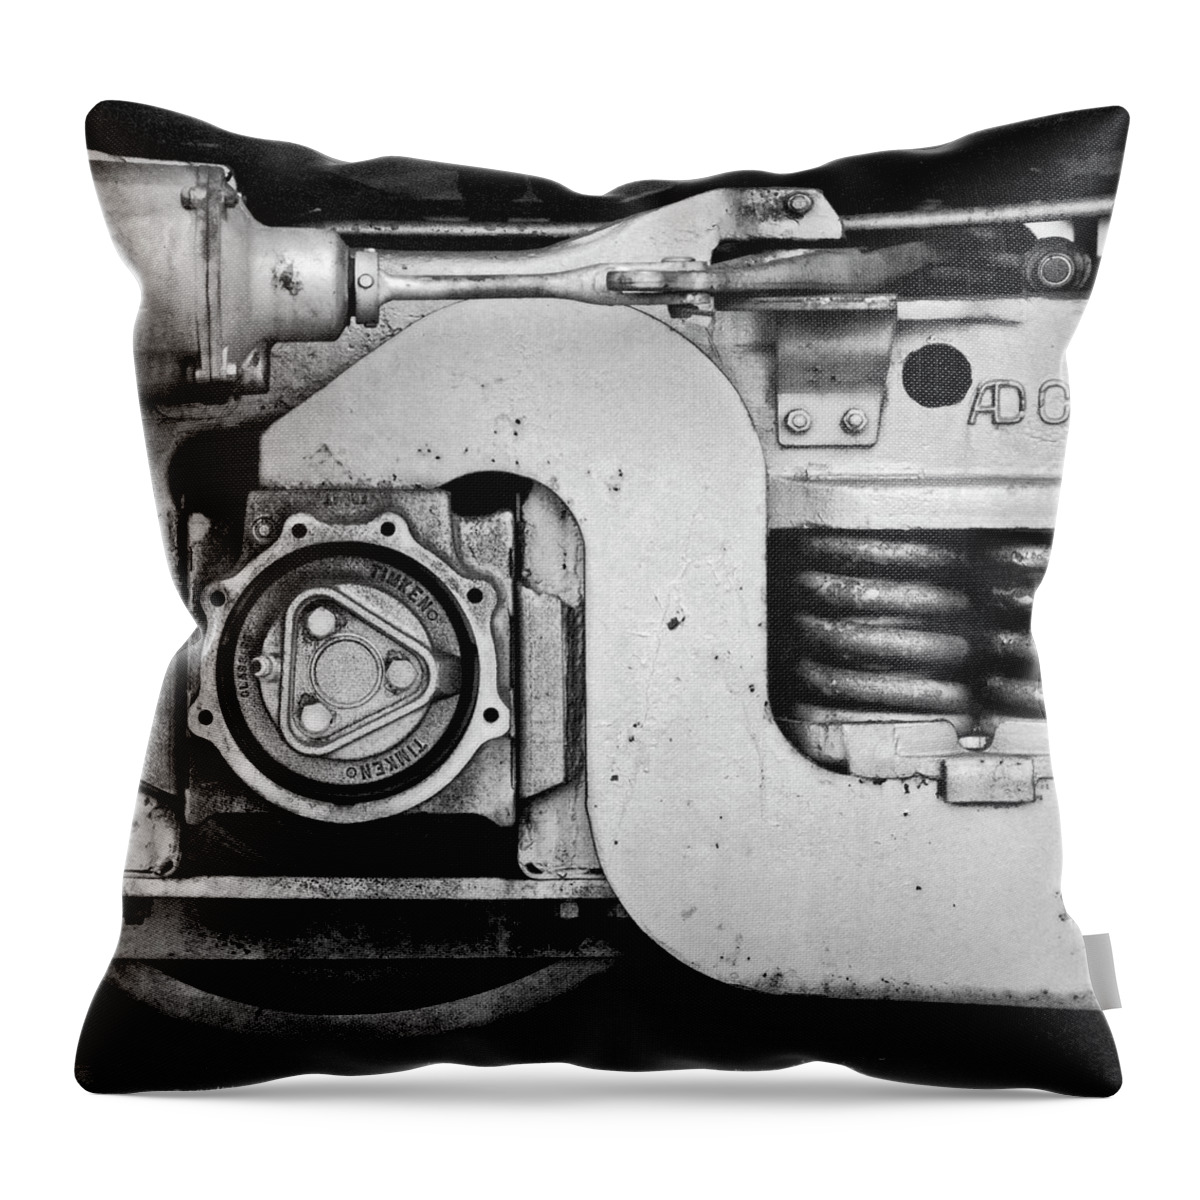 Photography Throw Pillow featuring the photograph Wheel And Brake Of A Railcar by Panoramic Images